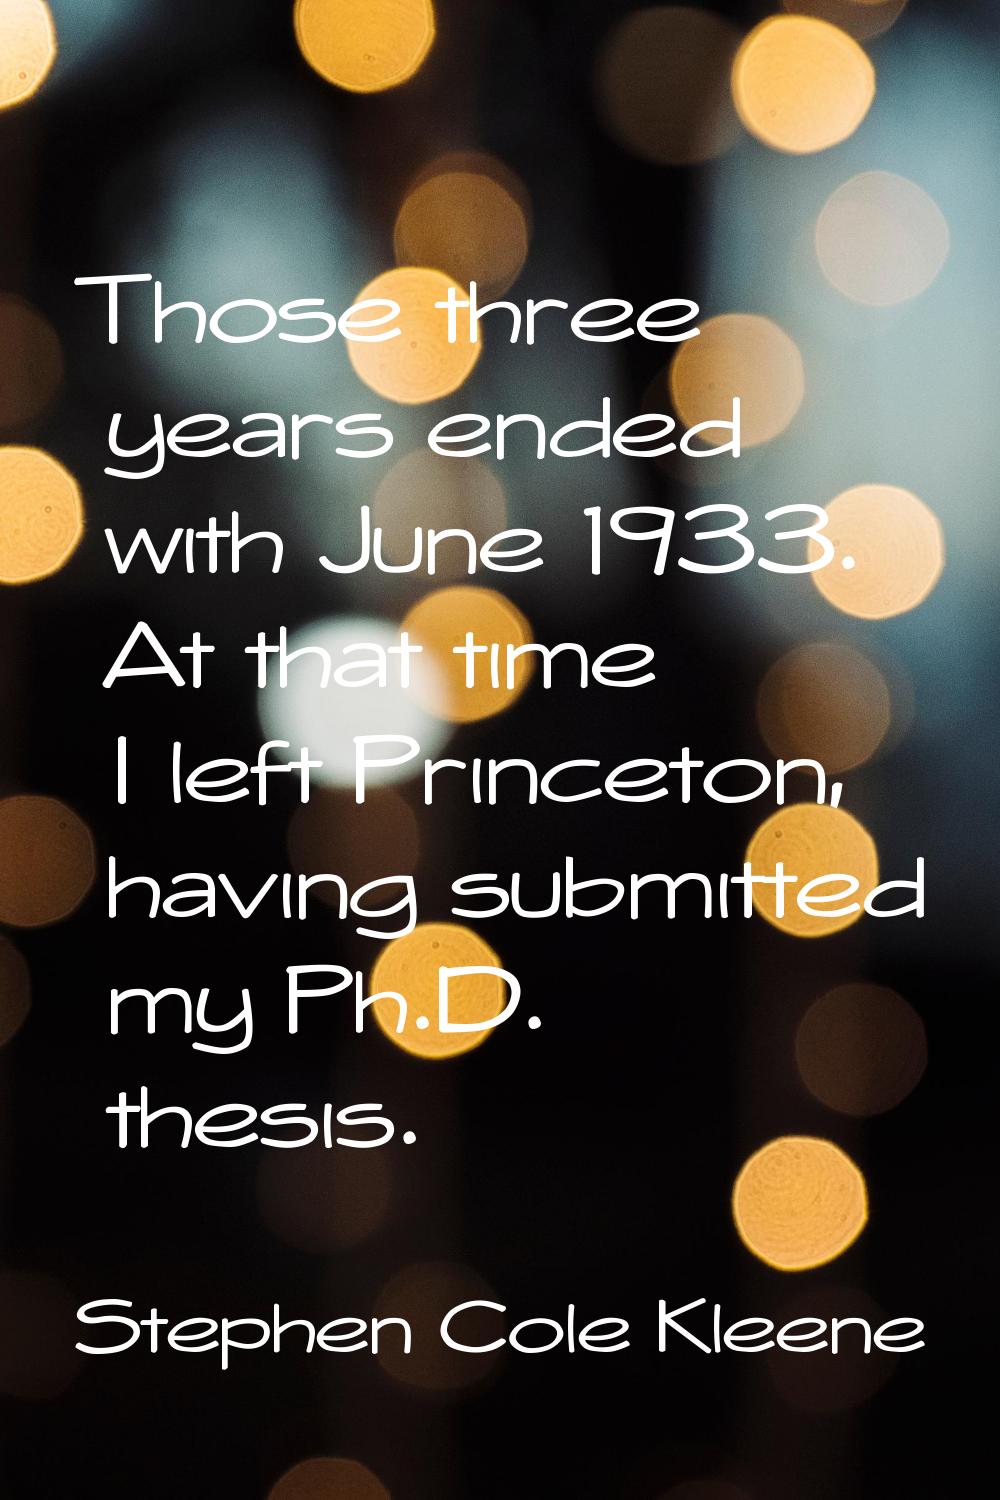 Those three years ended with June 1933. At that time I left Princeton, having submitted my Ph.D. th